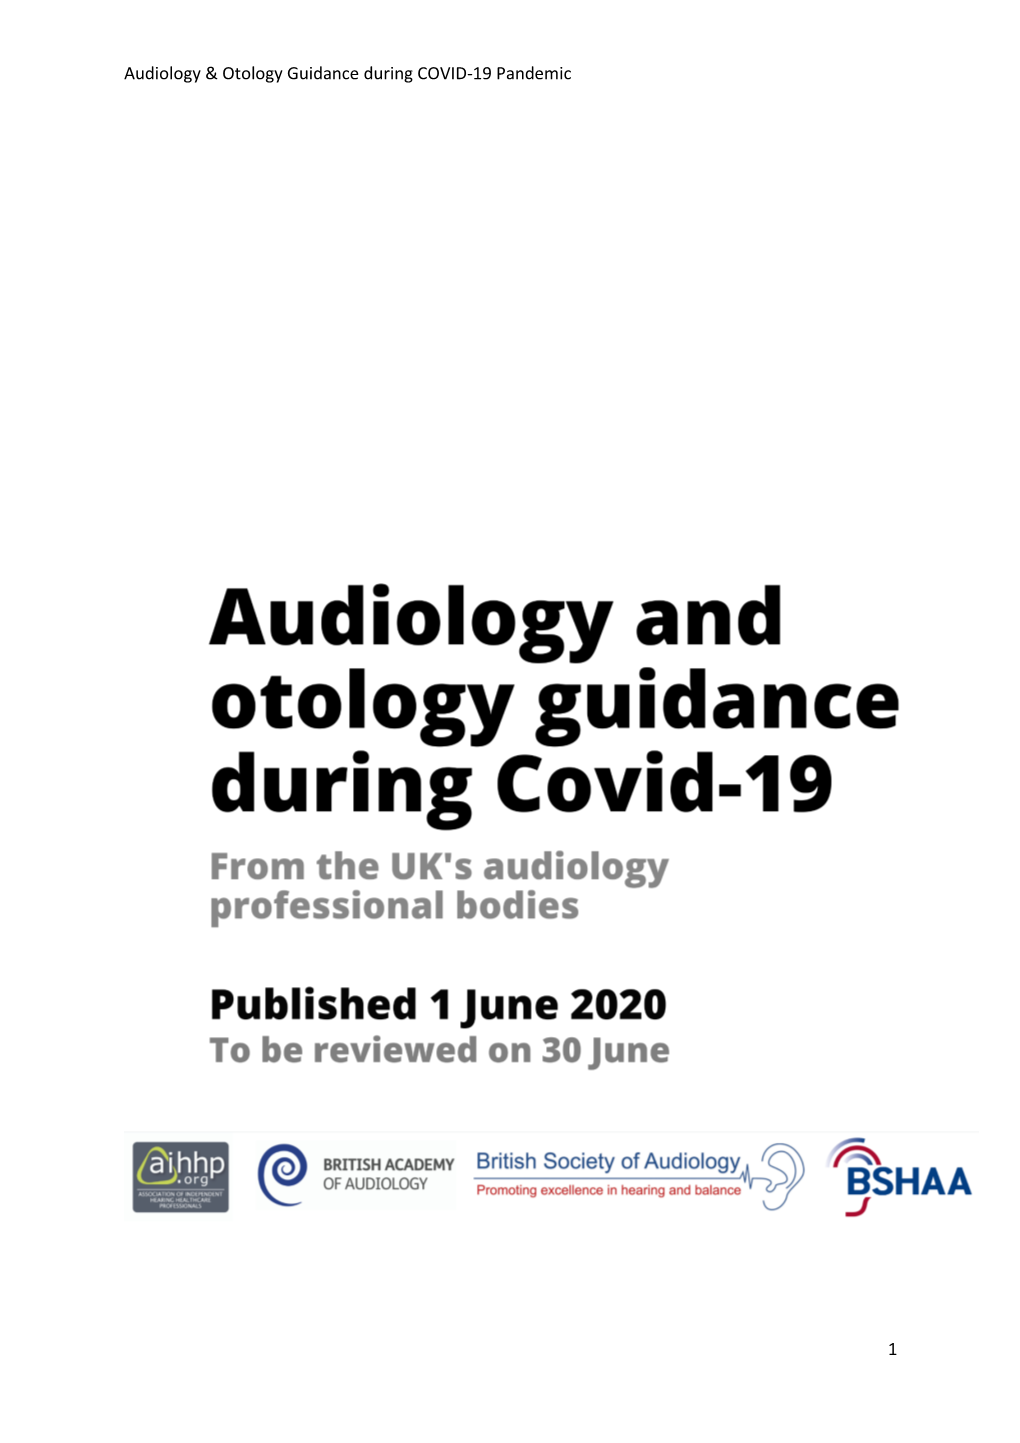 Audiology & Otology Guidance During COVID-19